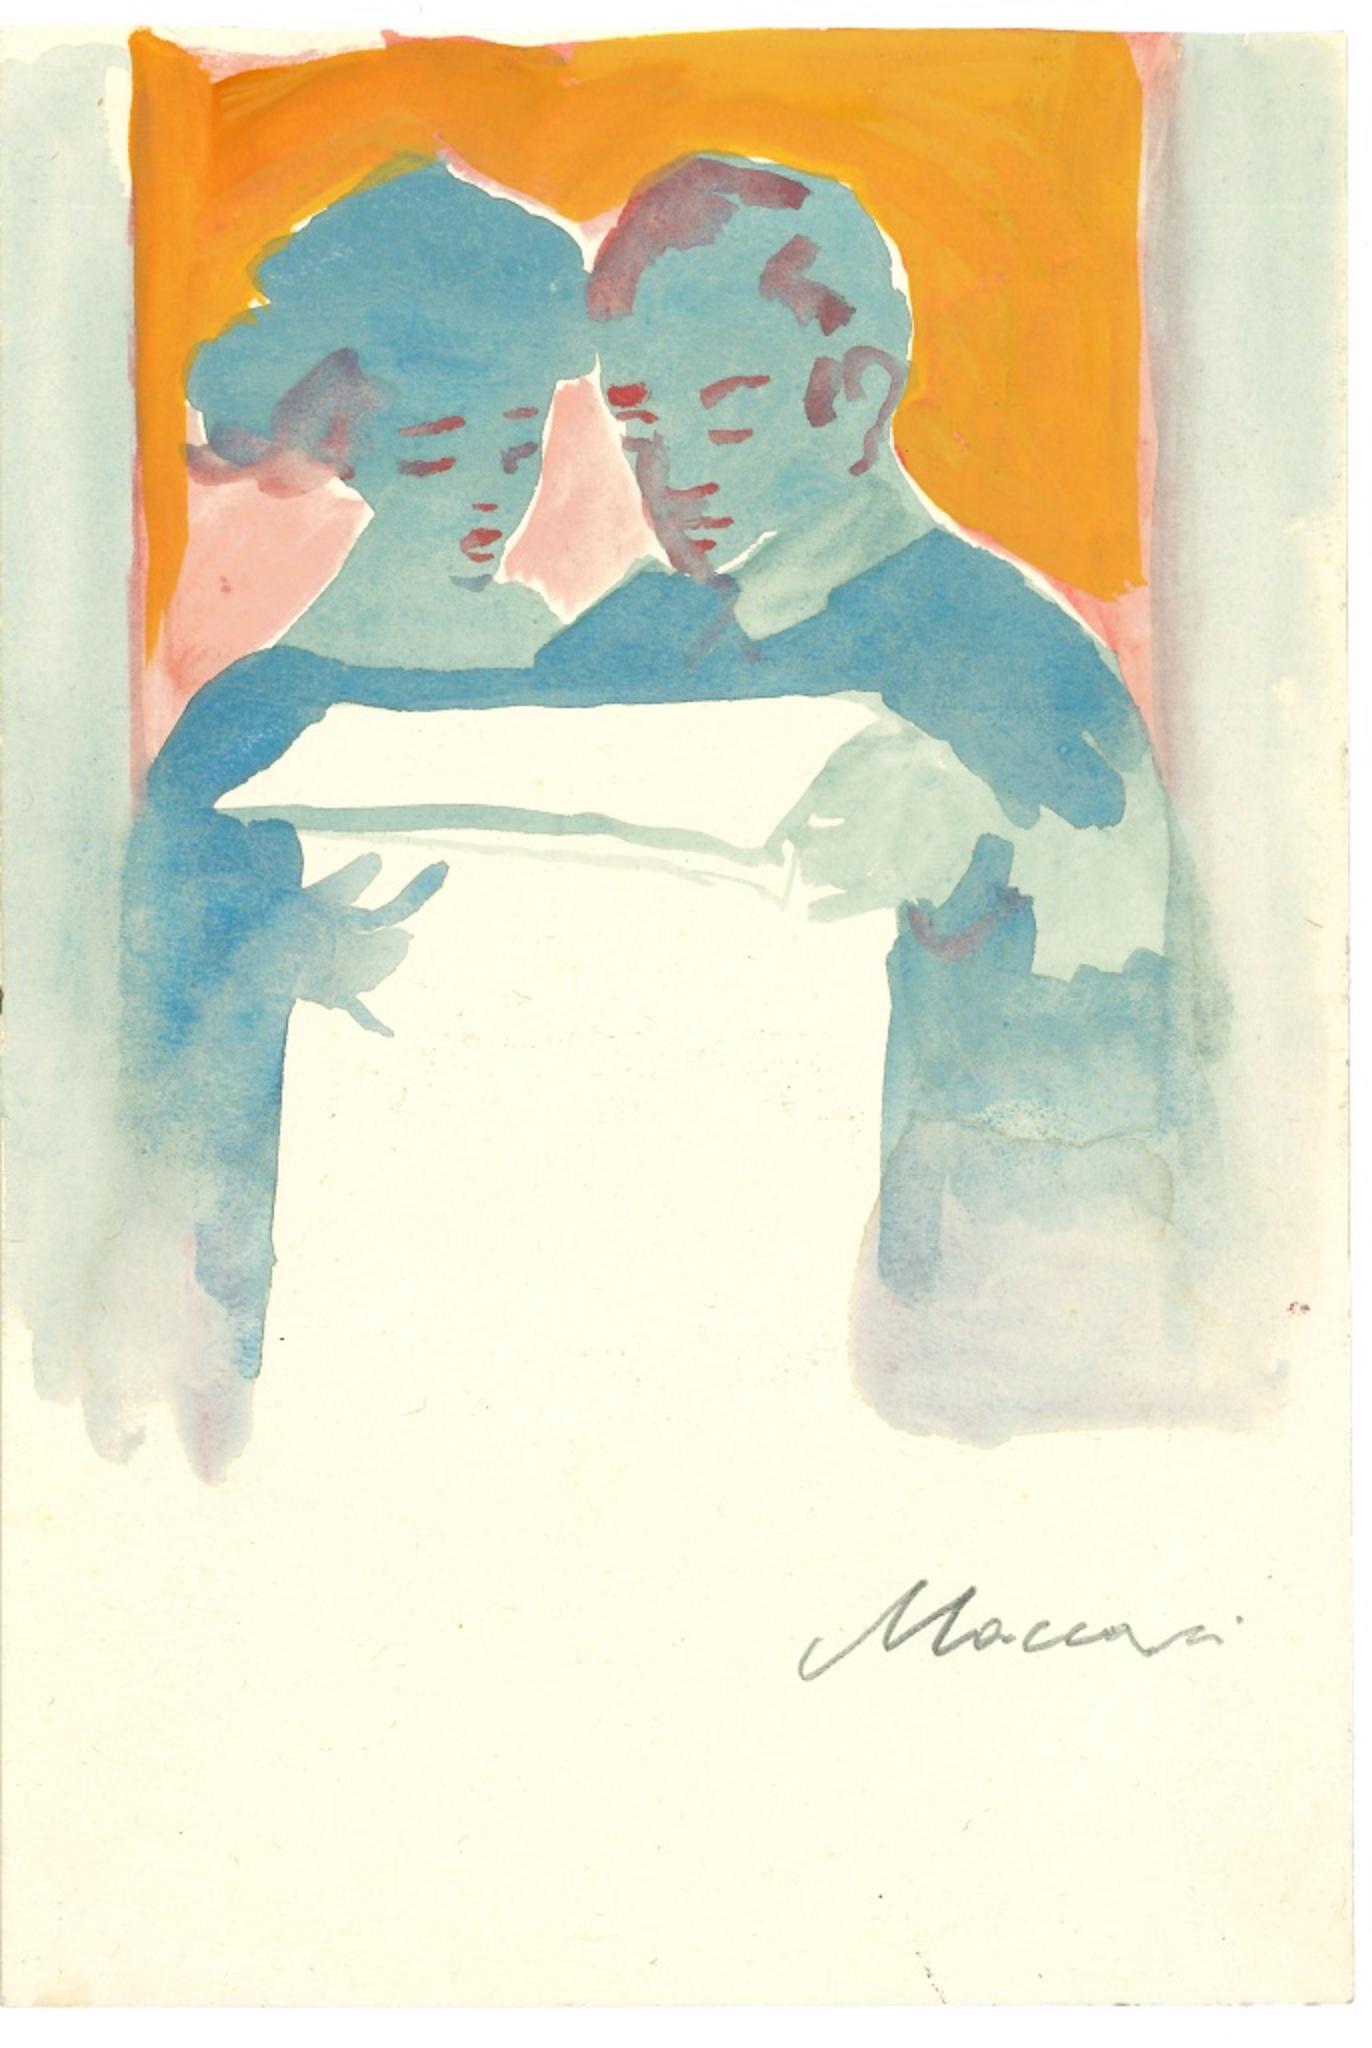 Couple Reading is an artwork realized by Mino Maccari in the 1970s.

Colored mixed media drawing on cardboard (ink and watercolor).

Hand signed by the artist on the lower margin.

Good conditions.

Mino Maccari (Siena, 1898 – Rome, 1989) was a